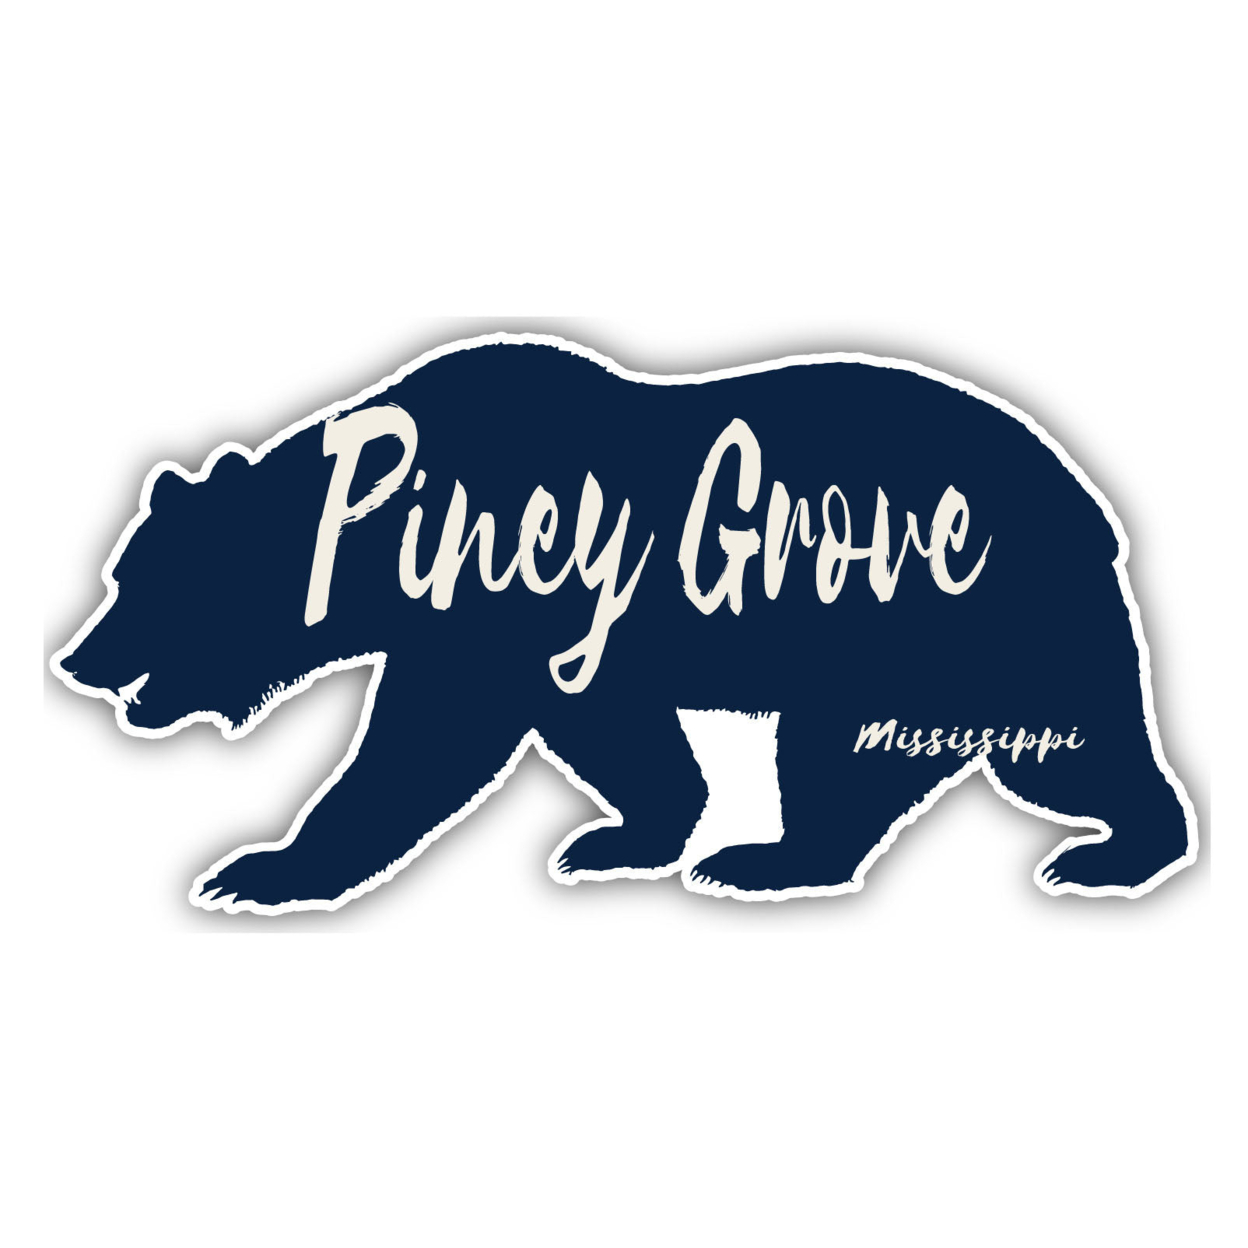 Piney Grove Mississippi Souvenir Decorative Stickers (Choose Theme And Size) - Single Unit, 4-Inch, Bear